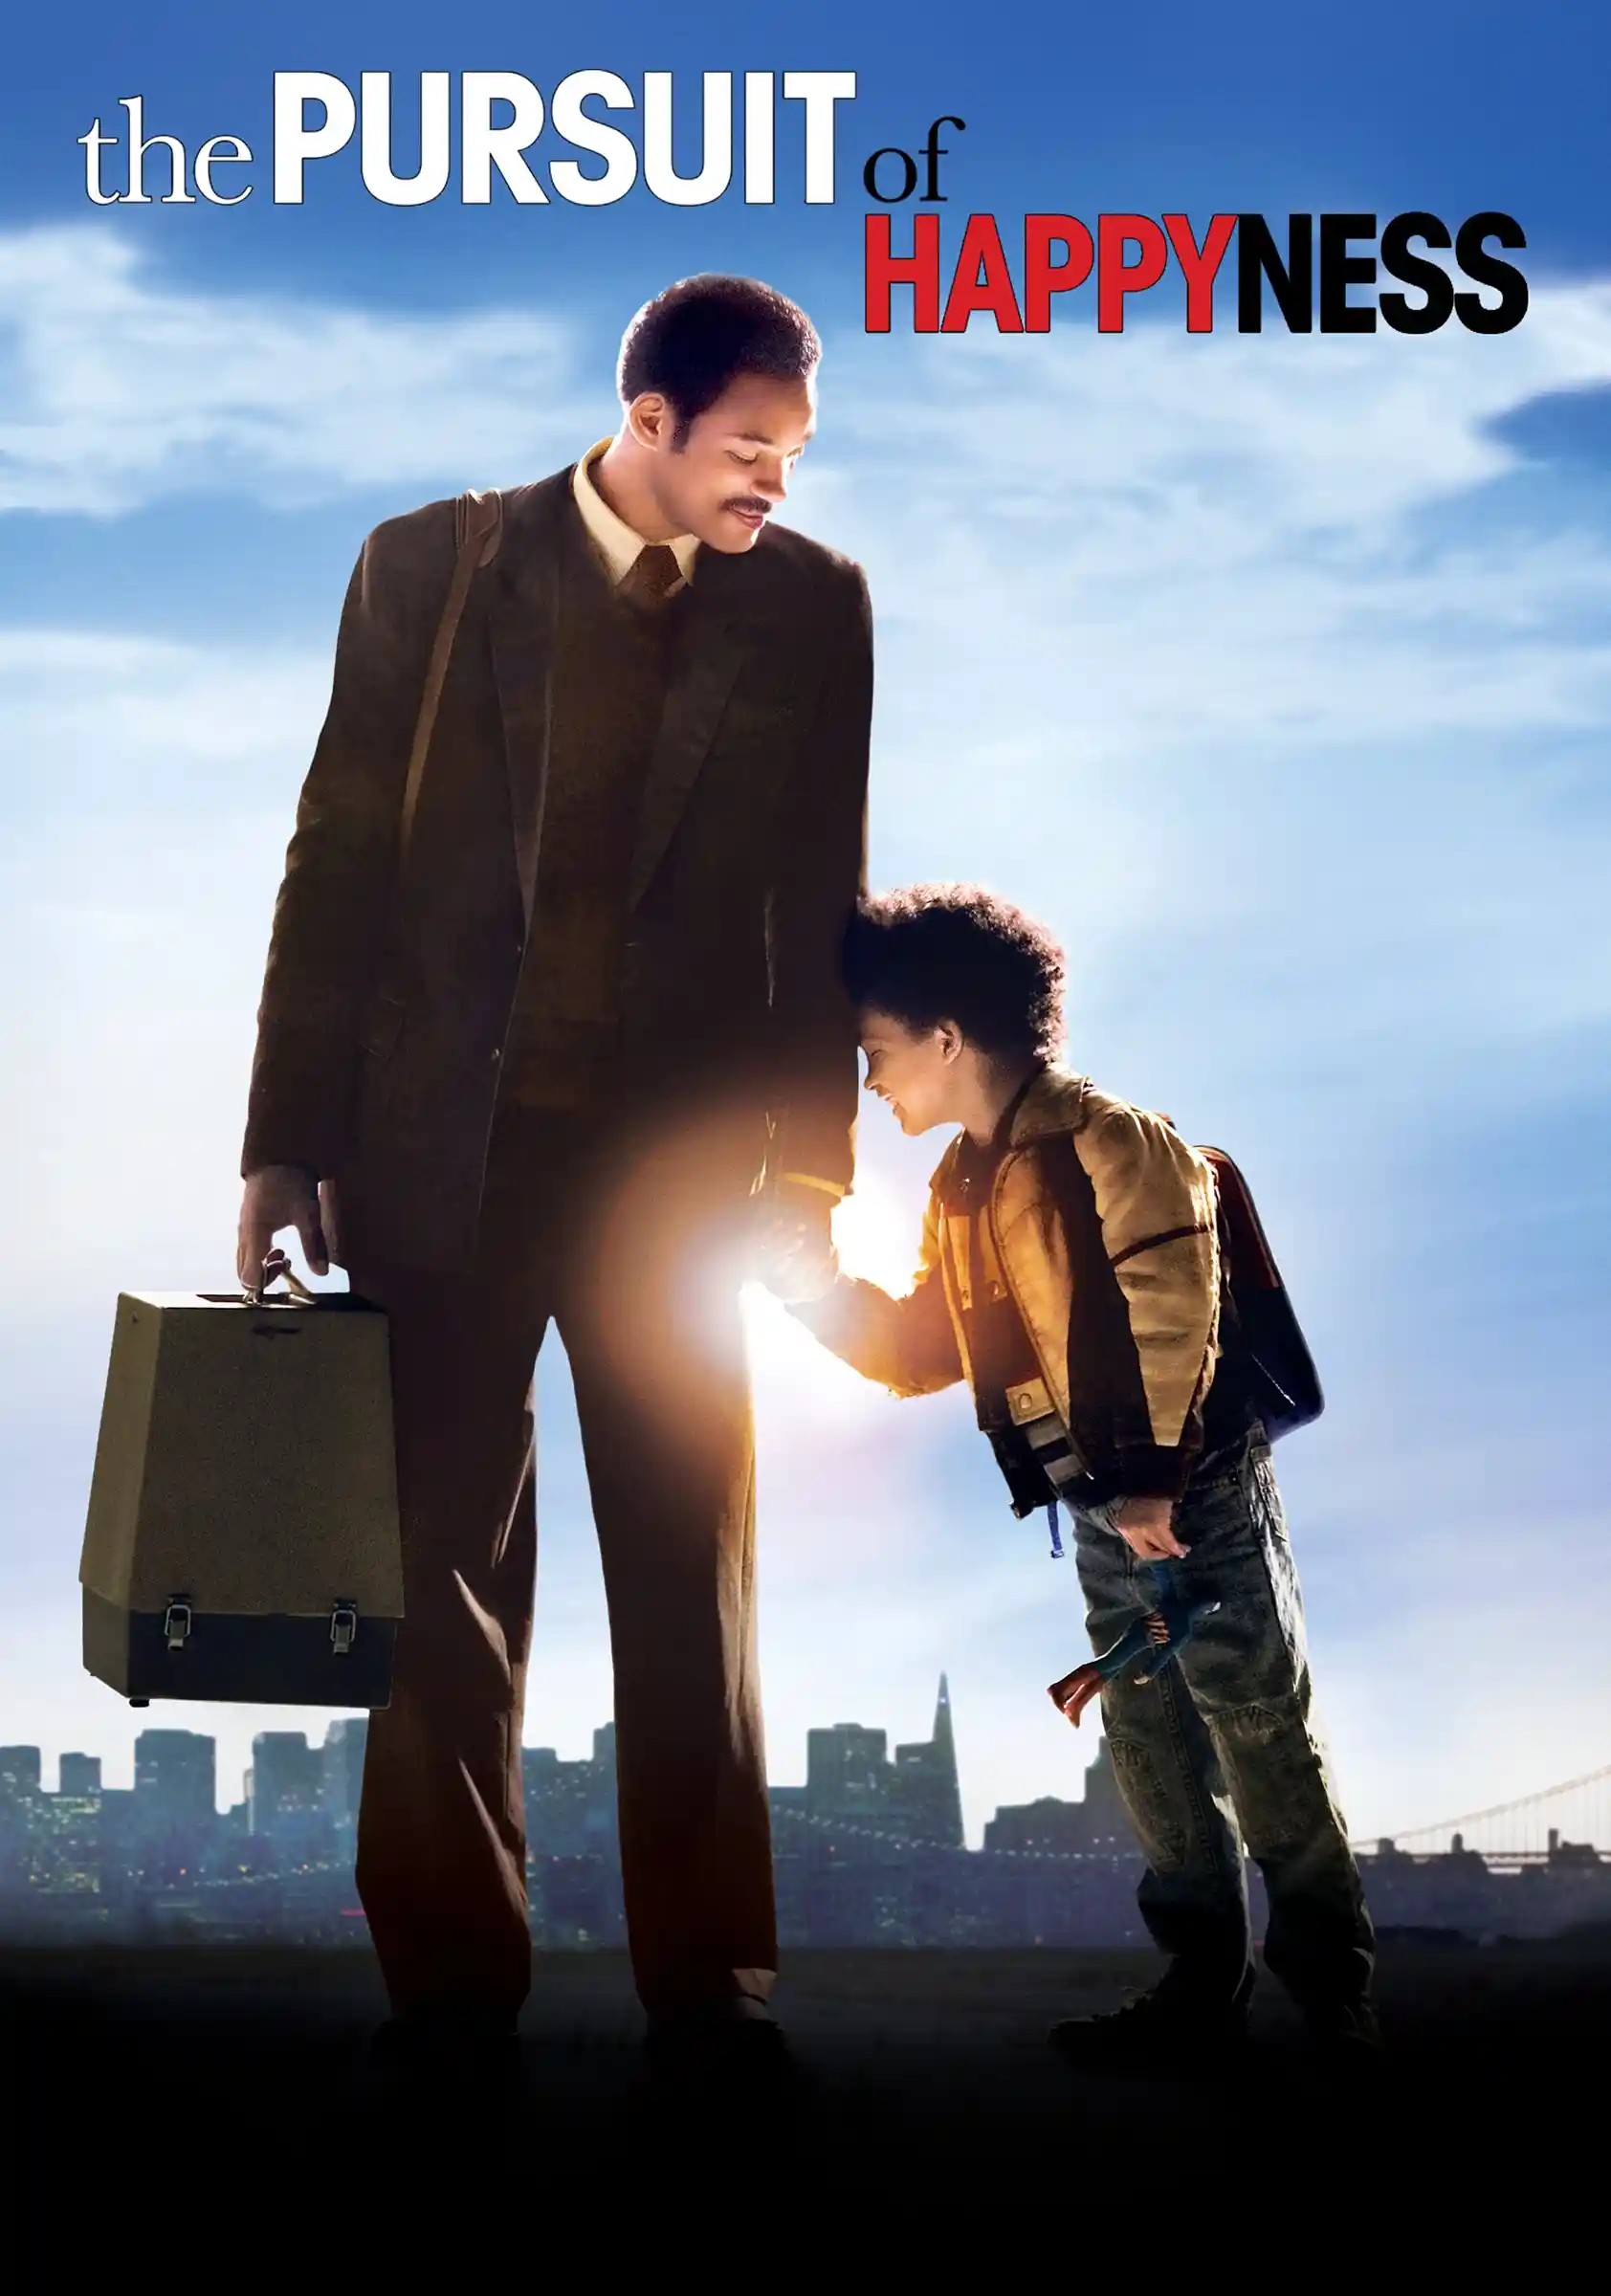 The Pursuit of Happyness movie poster for HR leaders